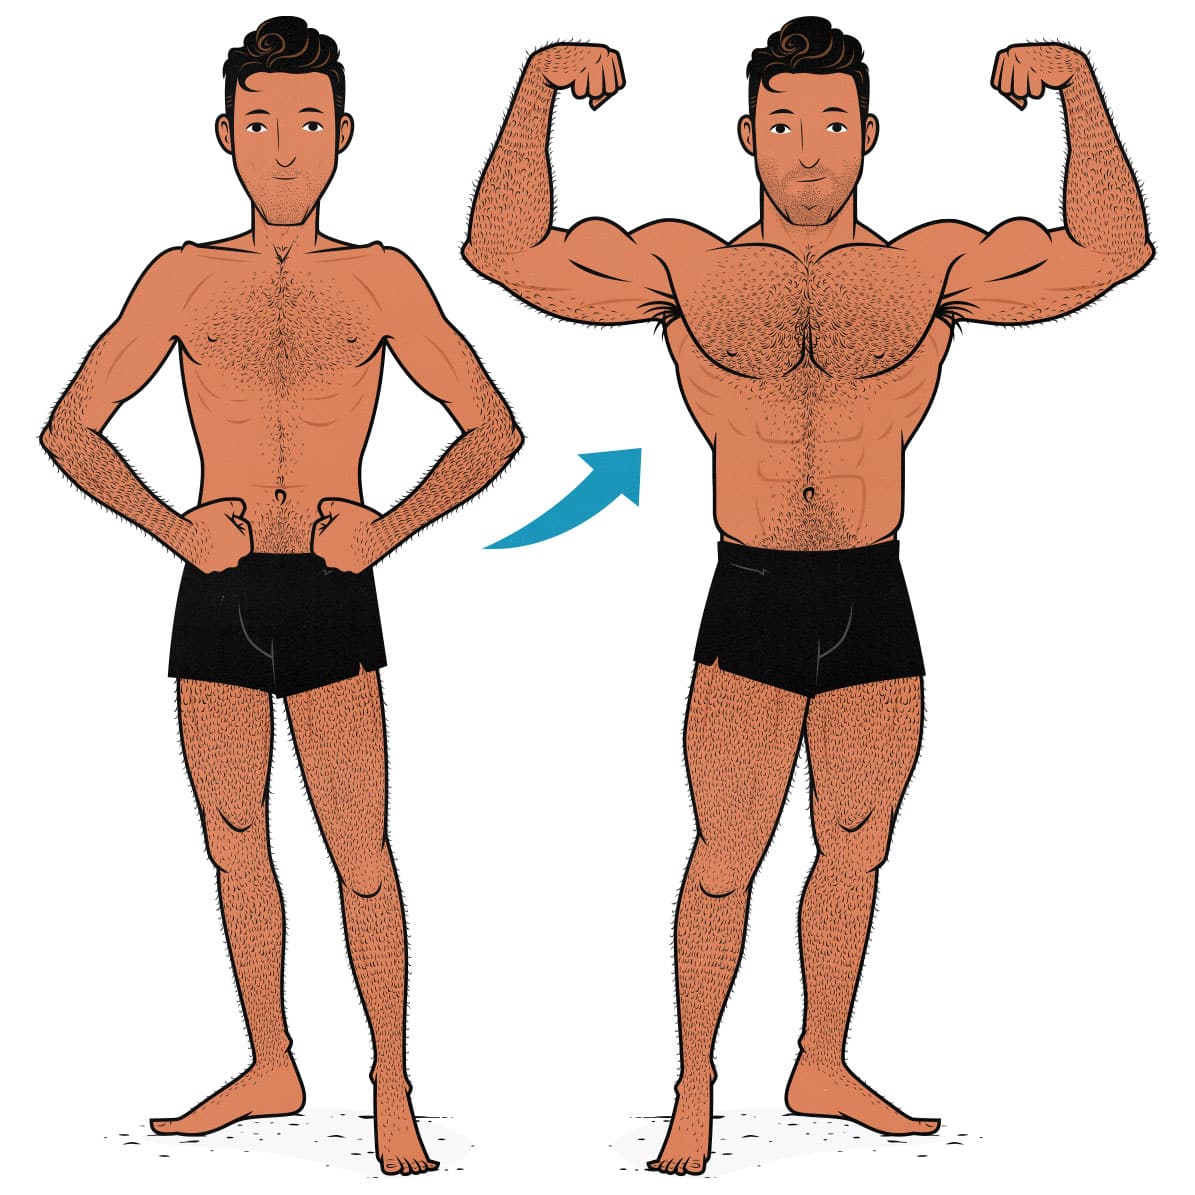 Cartoon illustration of a skinny guy using intermittent fasting to bulk up and become muscular.